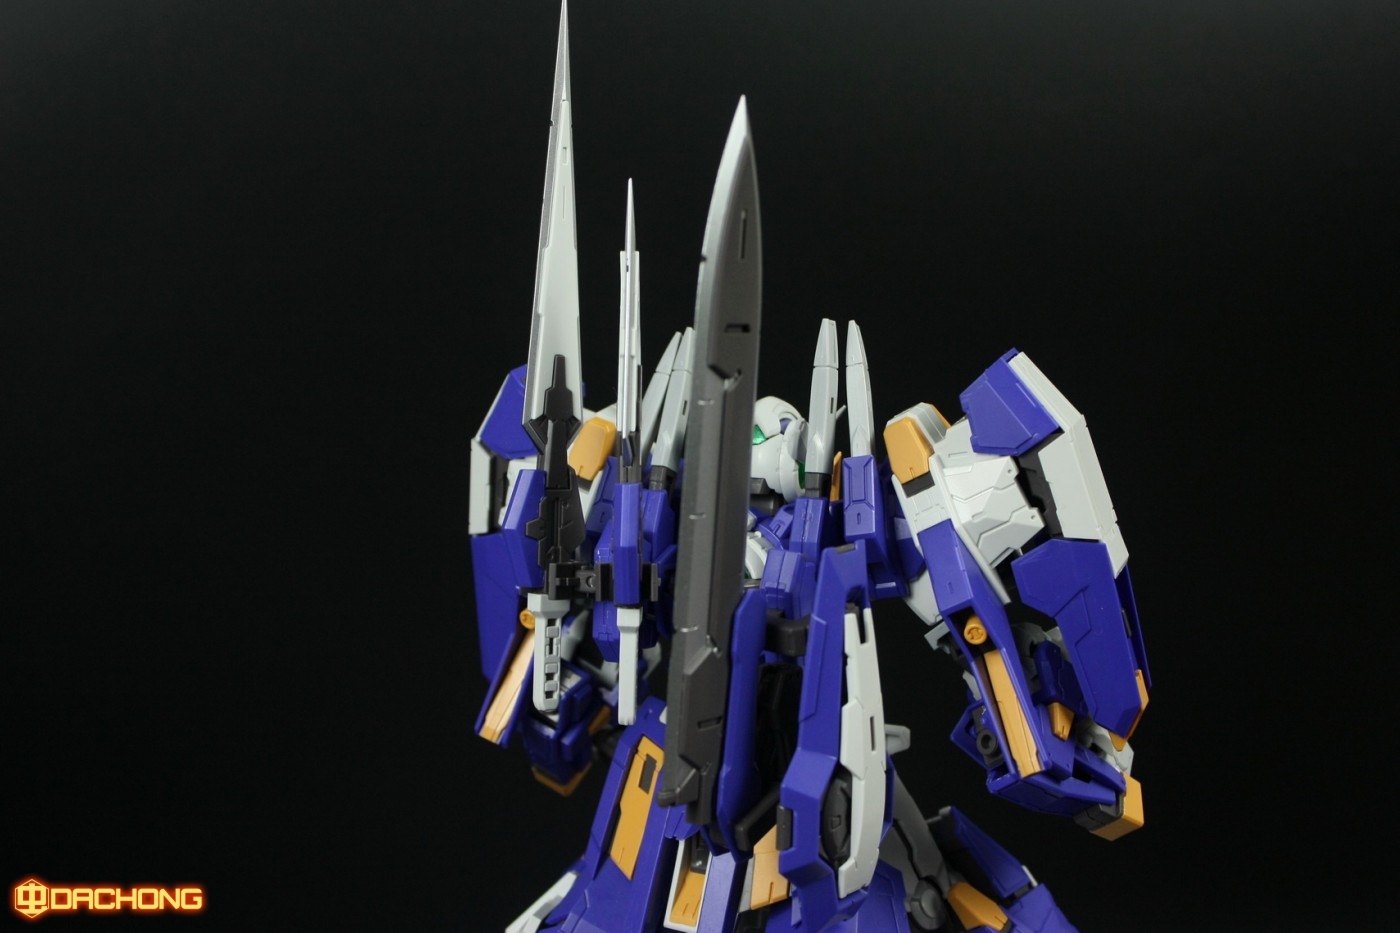 S254_MG_exia_HS_review_inask_073.jpg